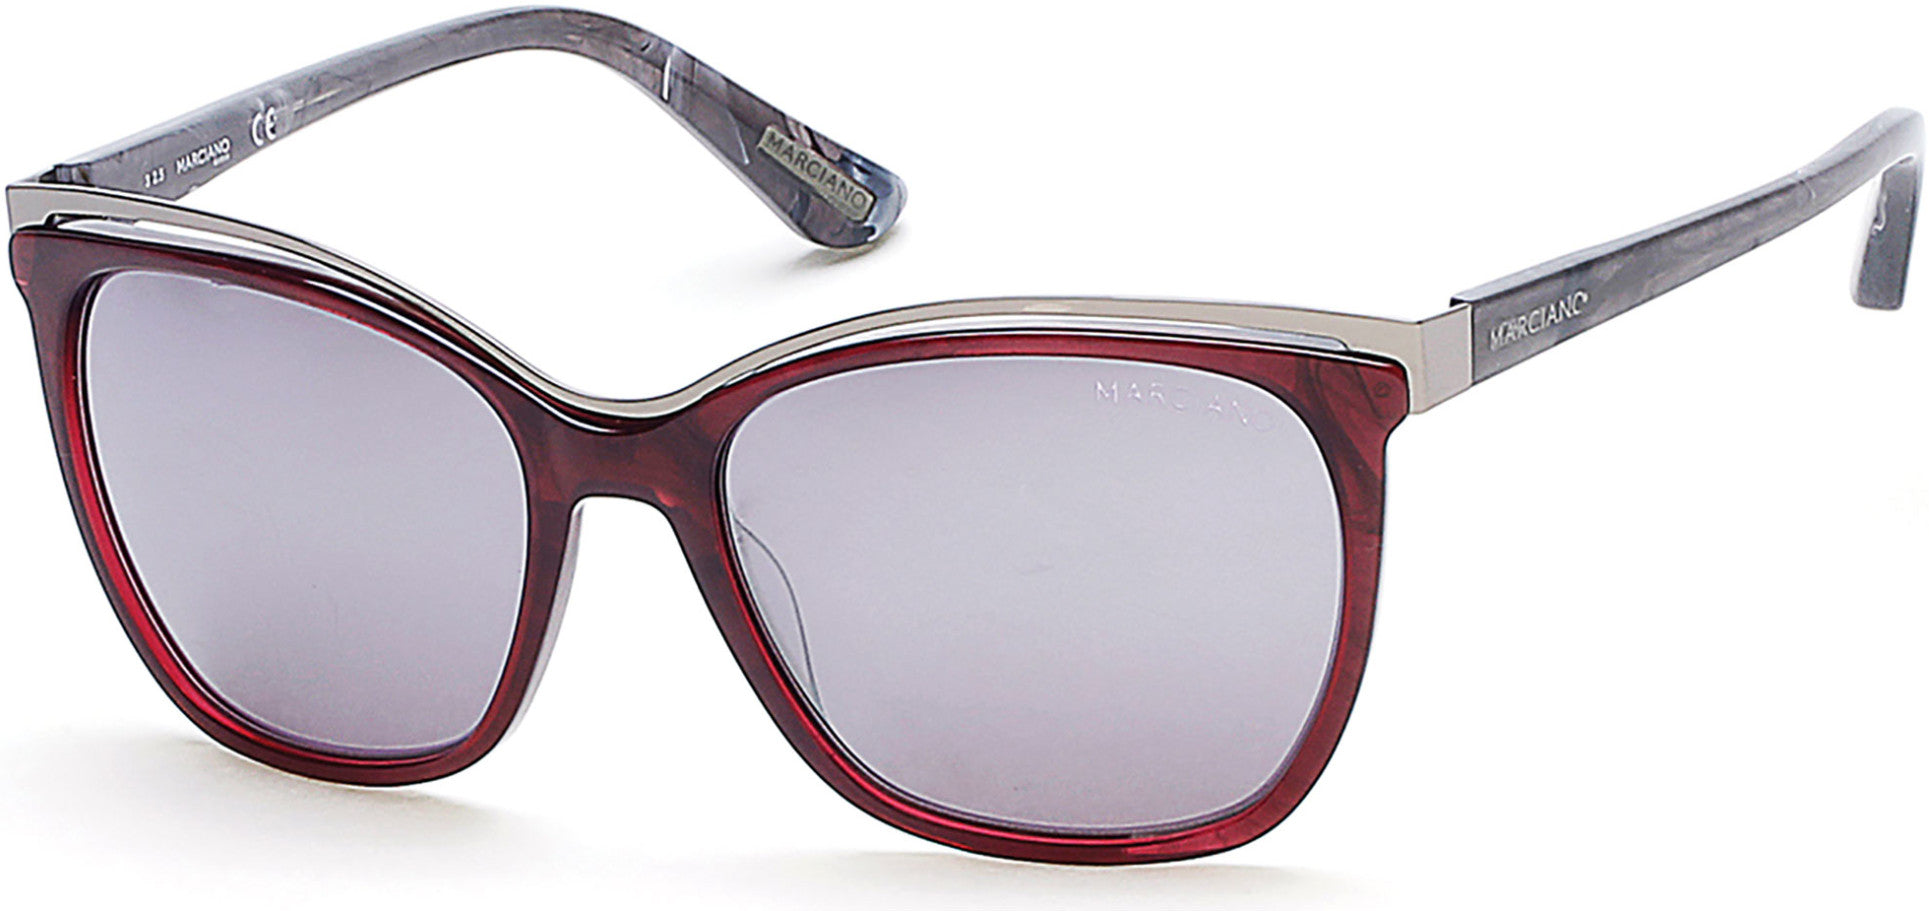 Guess By Marciano GM0745 Square Sunglasses 69C-69C - Shiny Bordeaux / Smoke Mirror